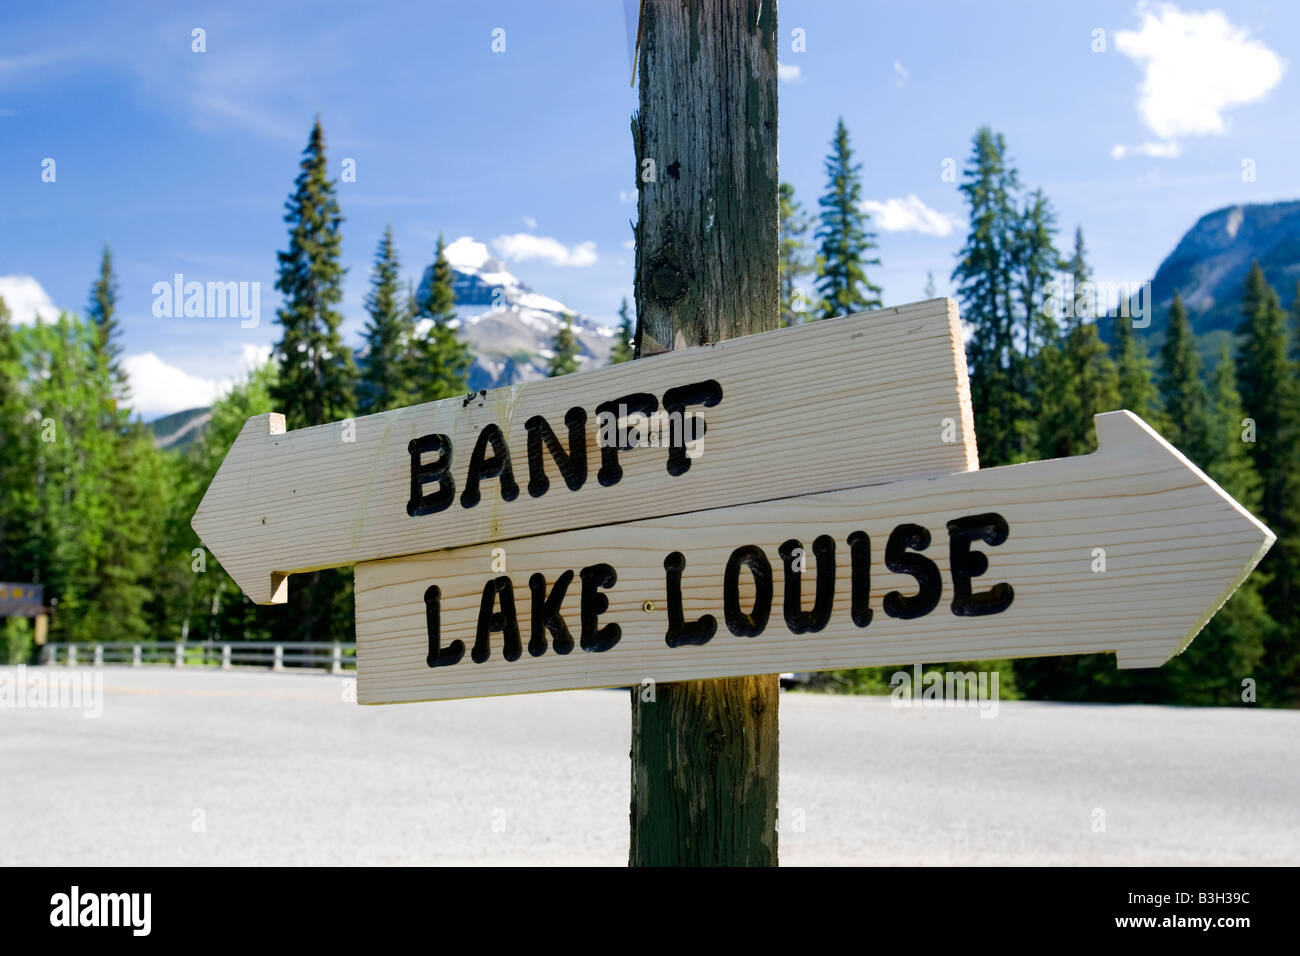 Signs for Banff and lake Louise Stock Photo